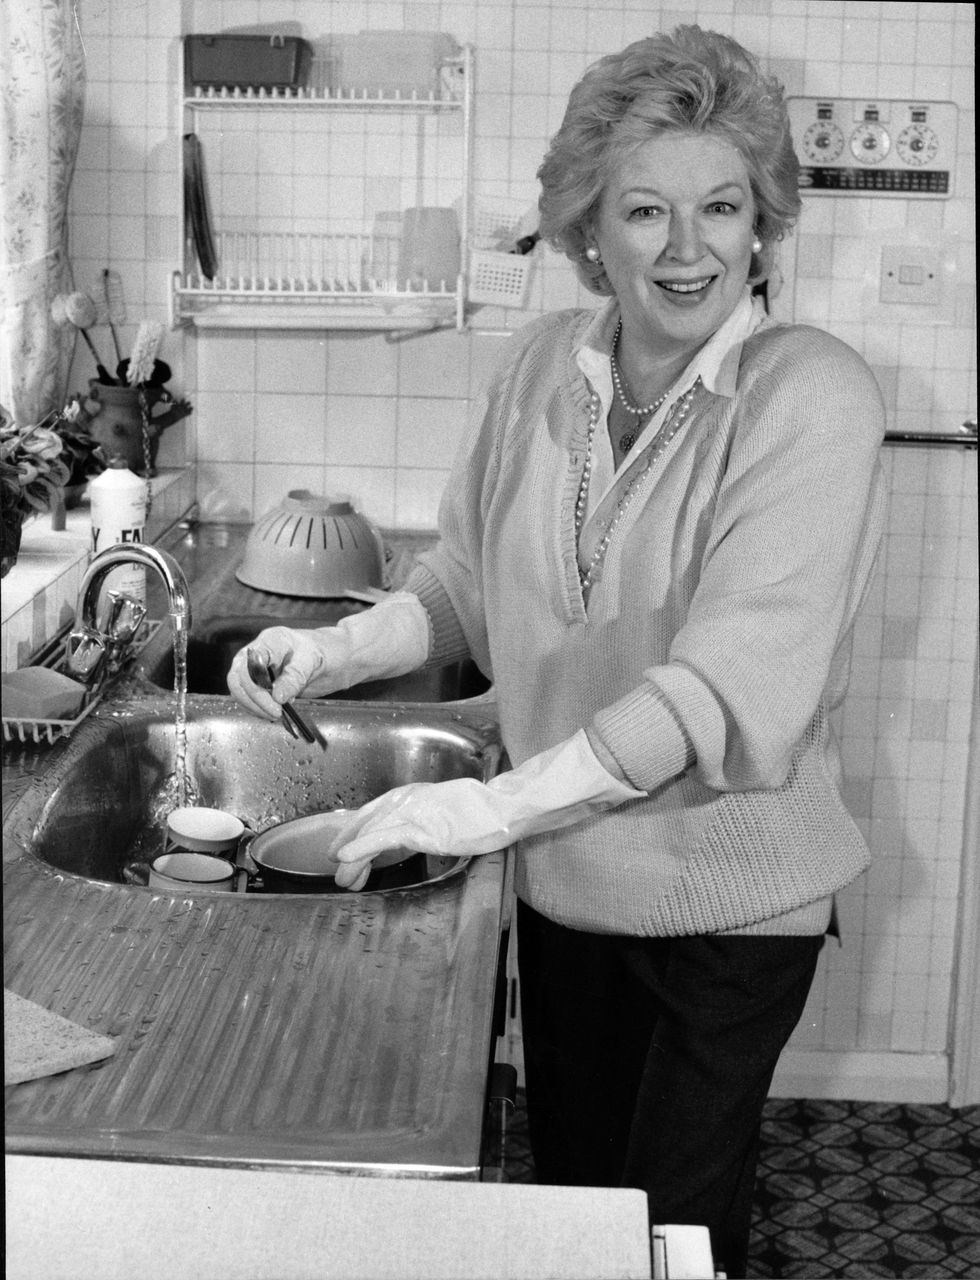 June Whitfield, TV actress, at her home in Wimbledondoing the washing up in her rubber gloves.